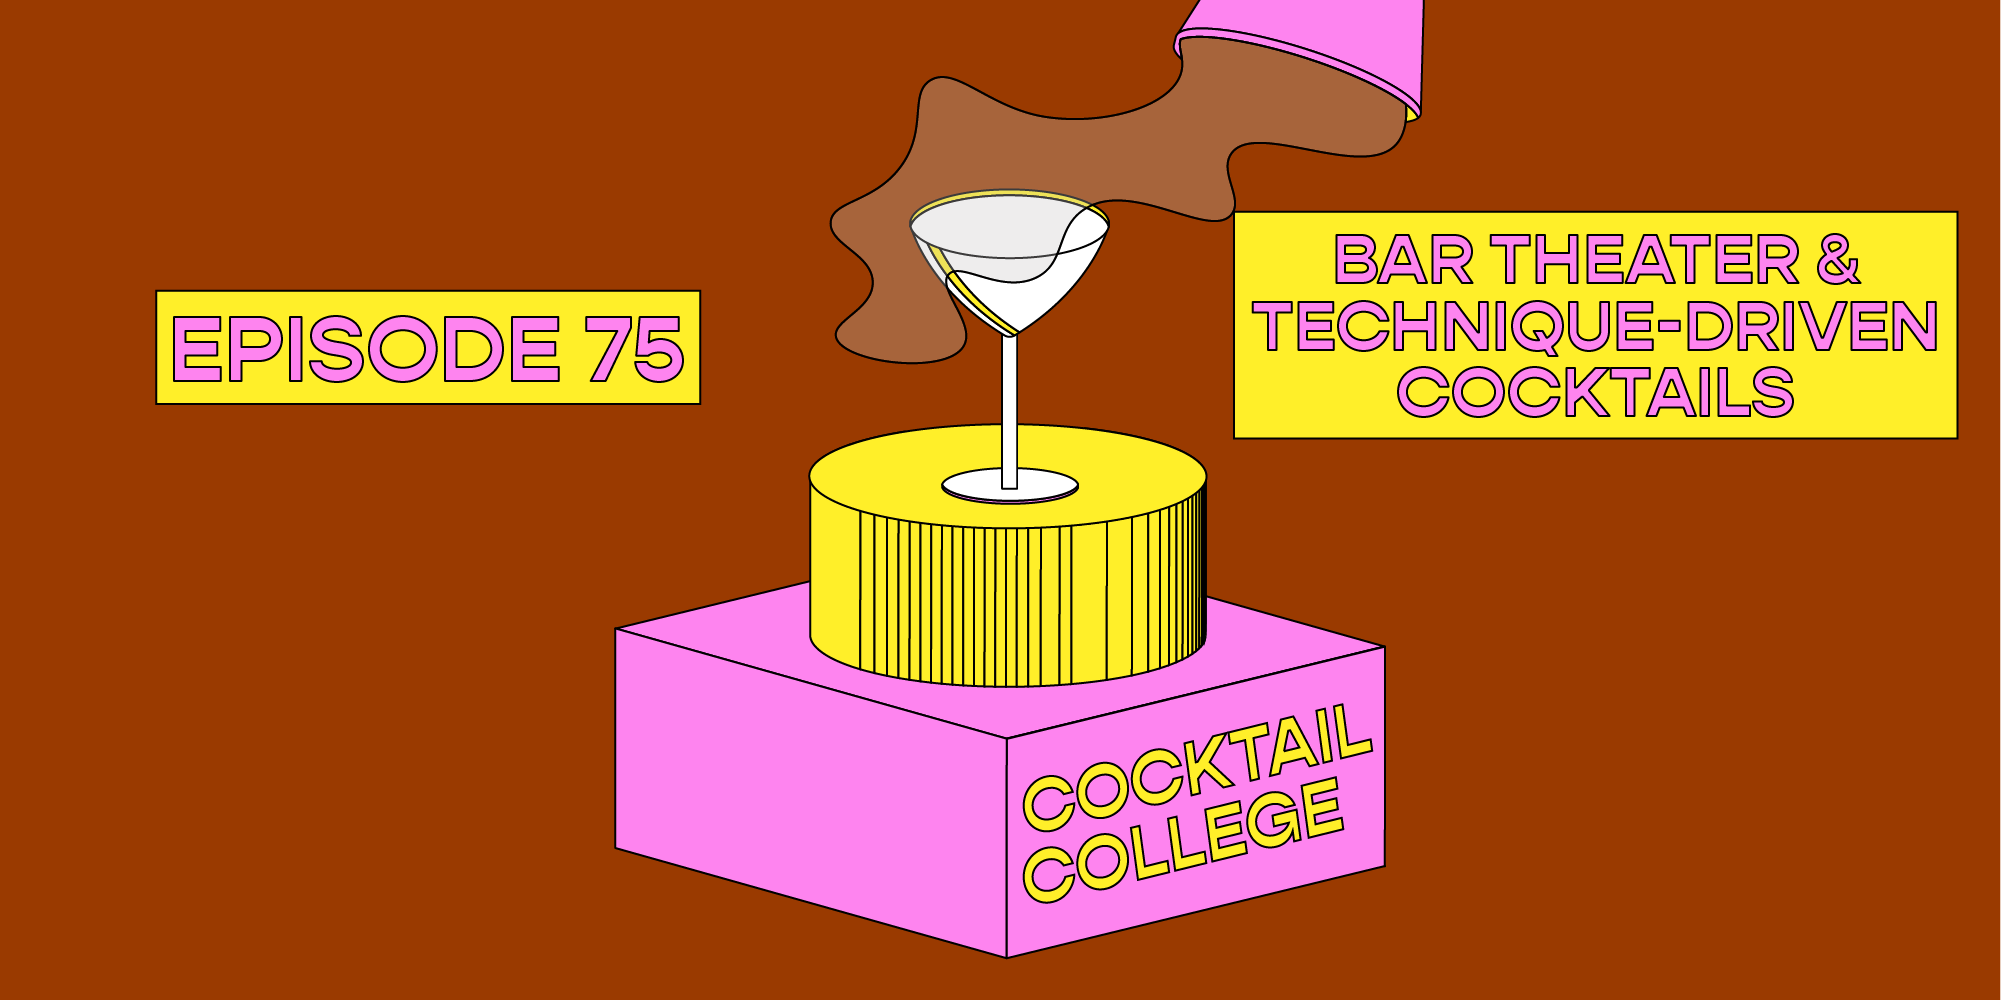 Why We Don't Batch Cocktails - The Bartender Company